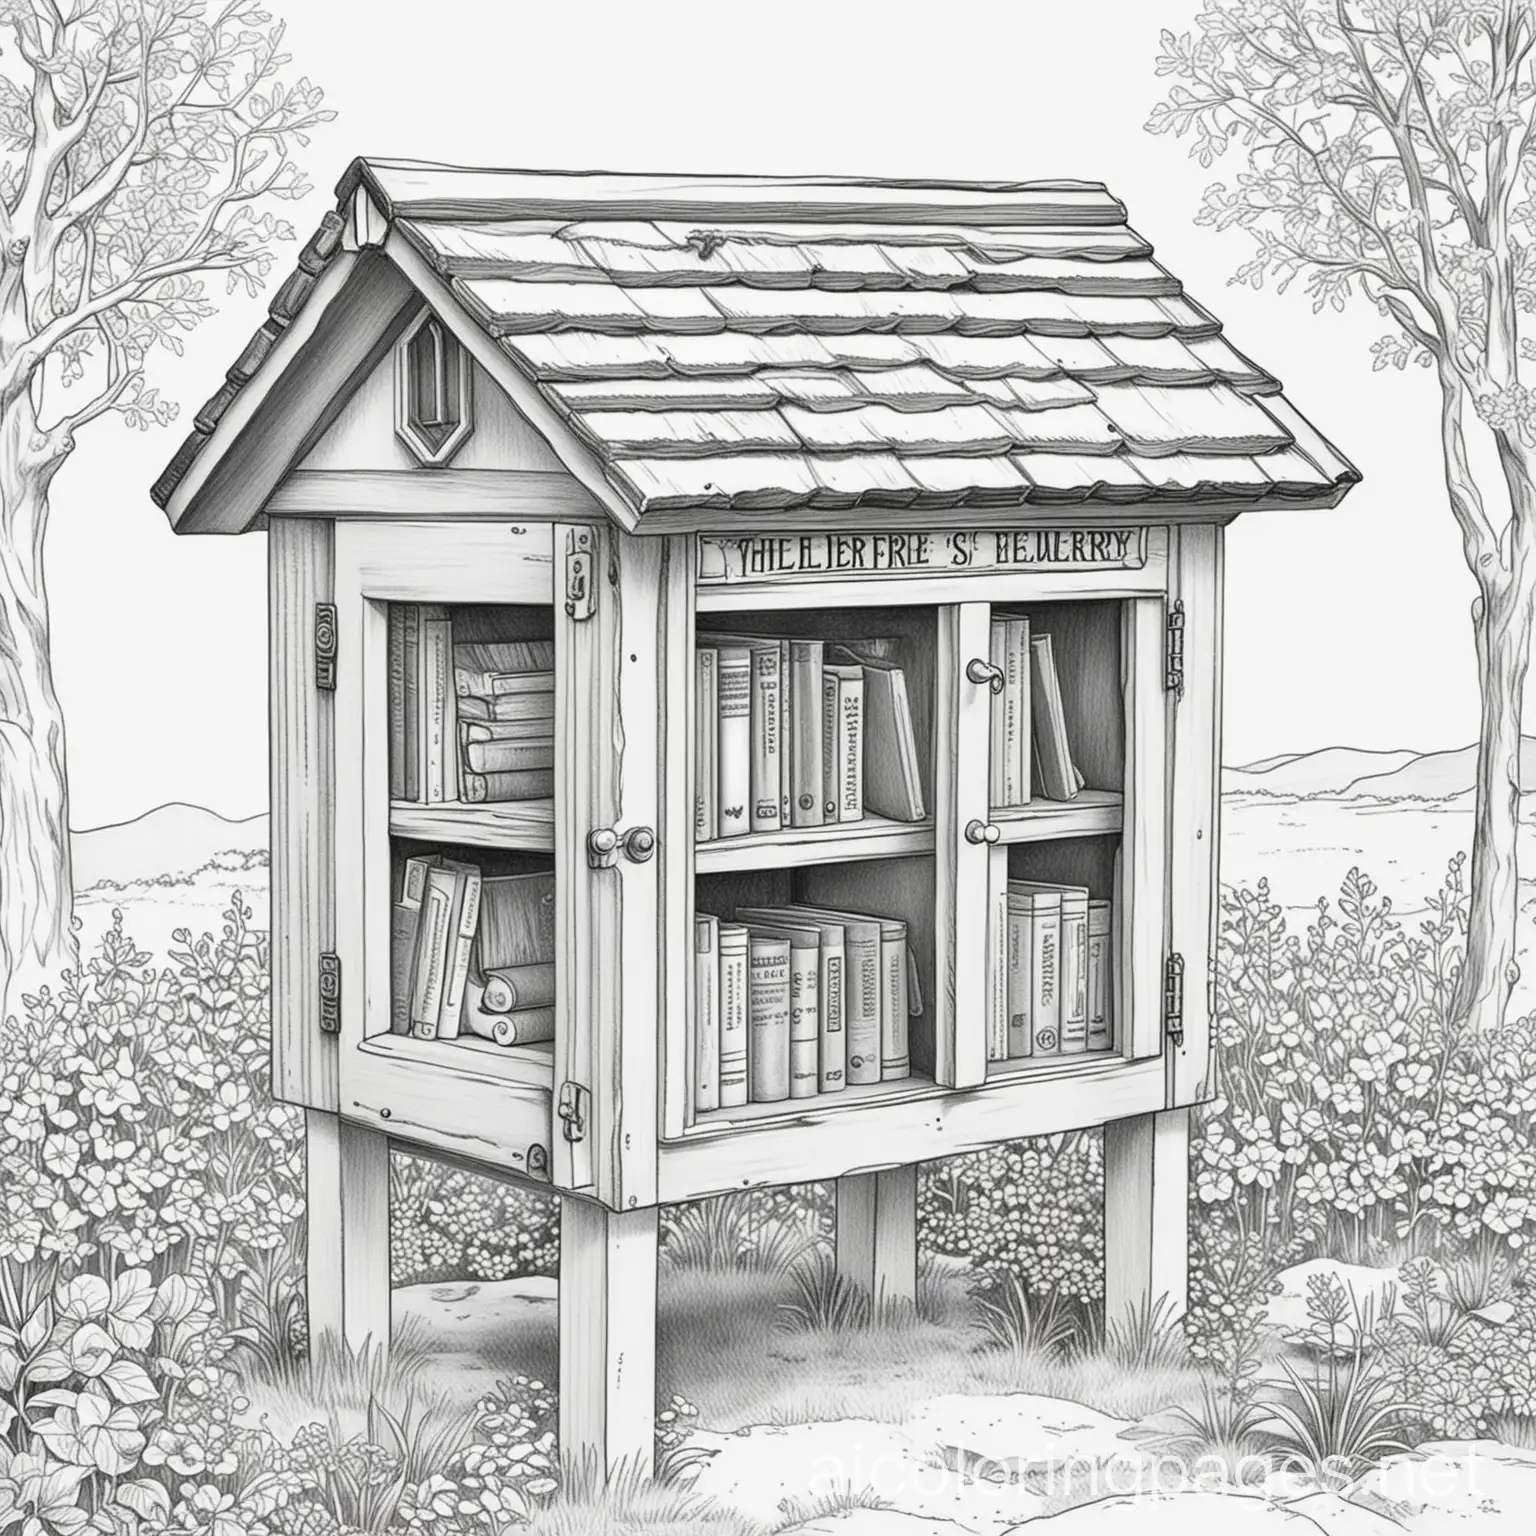 Little Free Library, Coloring Page, black and white, line art, white background, Simplicity, Ample White Space. The background of the coloring page is plain white to make it easy for young children to color within the lines. The outlines of all the subjects are easy to distinguish, making it simple for kids to color without too much difficulty